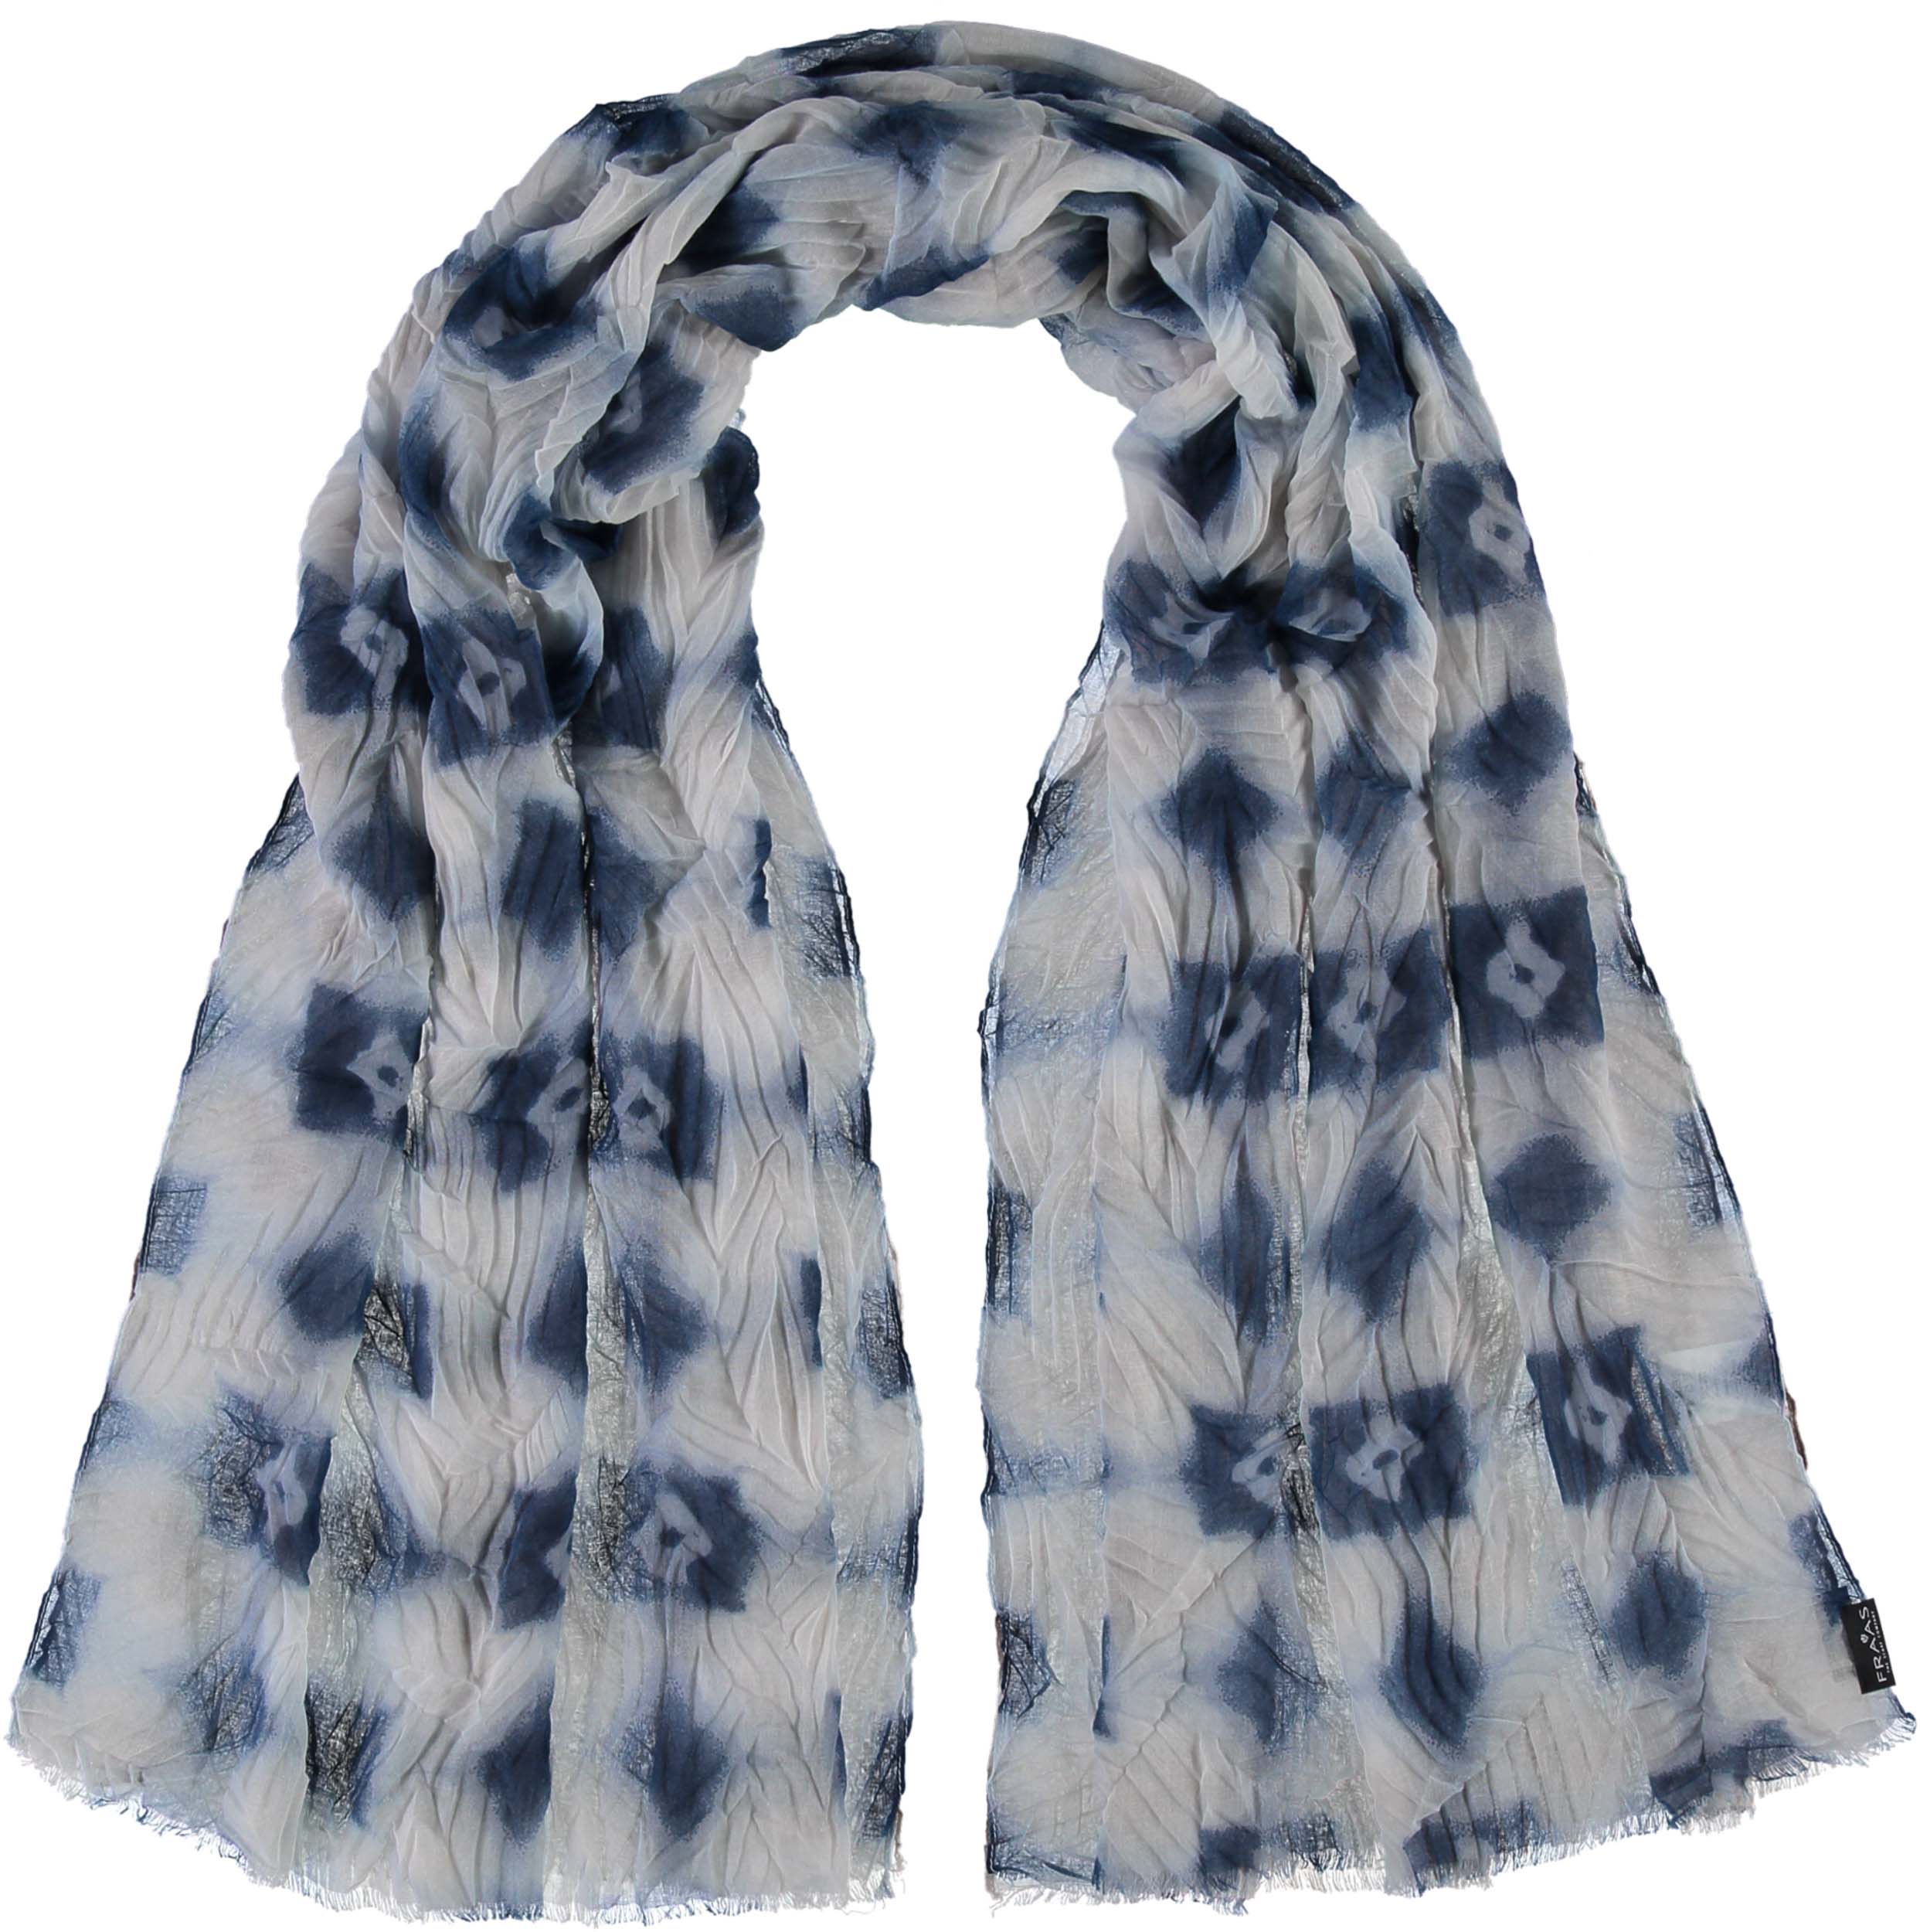 Misted Tie Dye Polyester Printed Crinkled Scarf